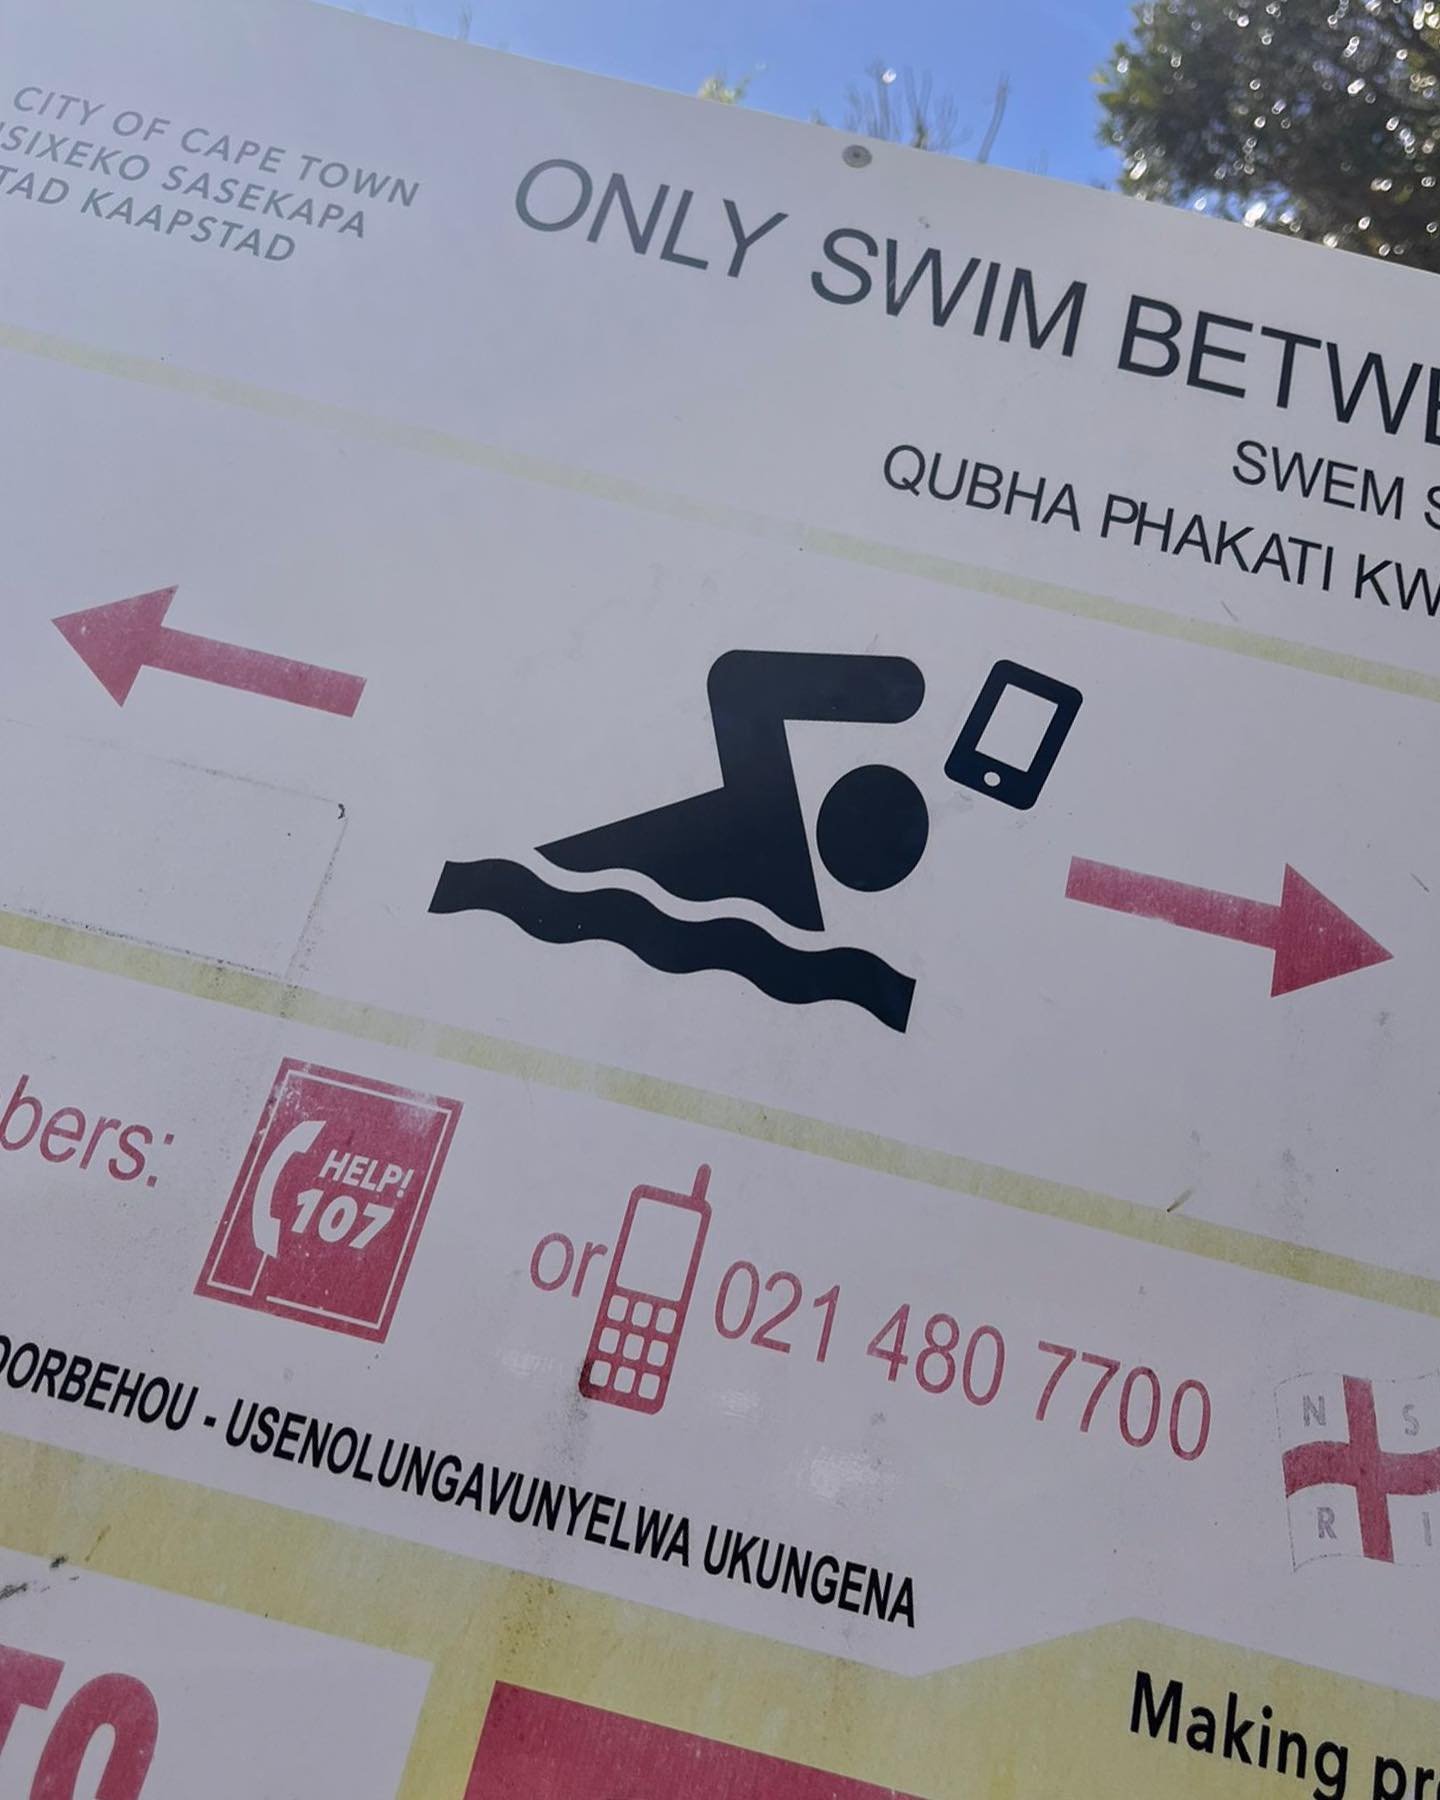 CAUTION: There are people swimming in the ocean in South Africa and they&rsquo;re looking at their phones instead of paying attention to rip currents. #cautioncellphones 📱👀⚠️